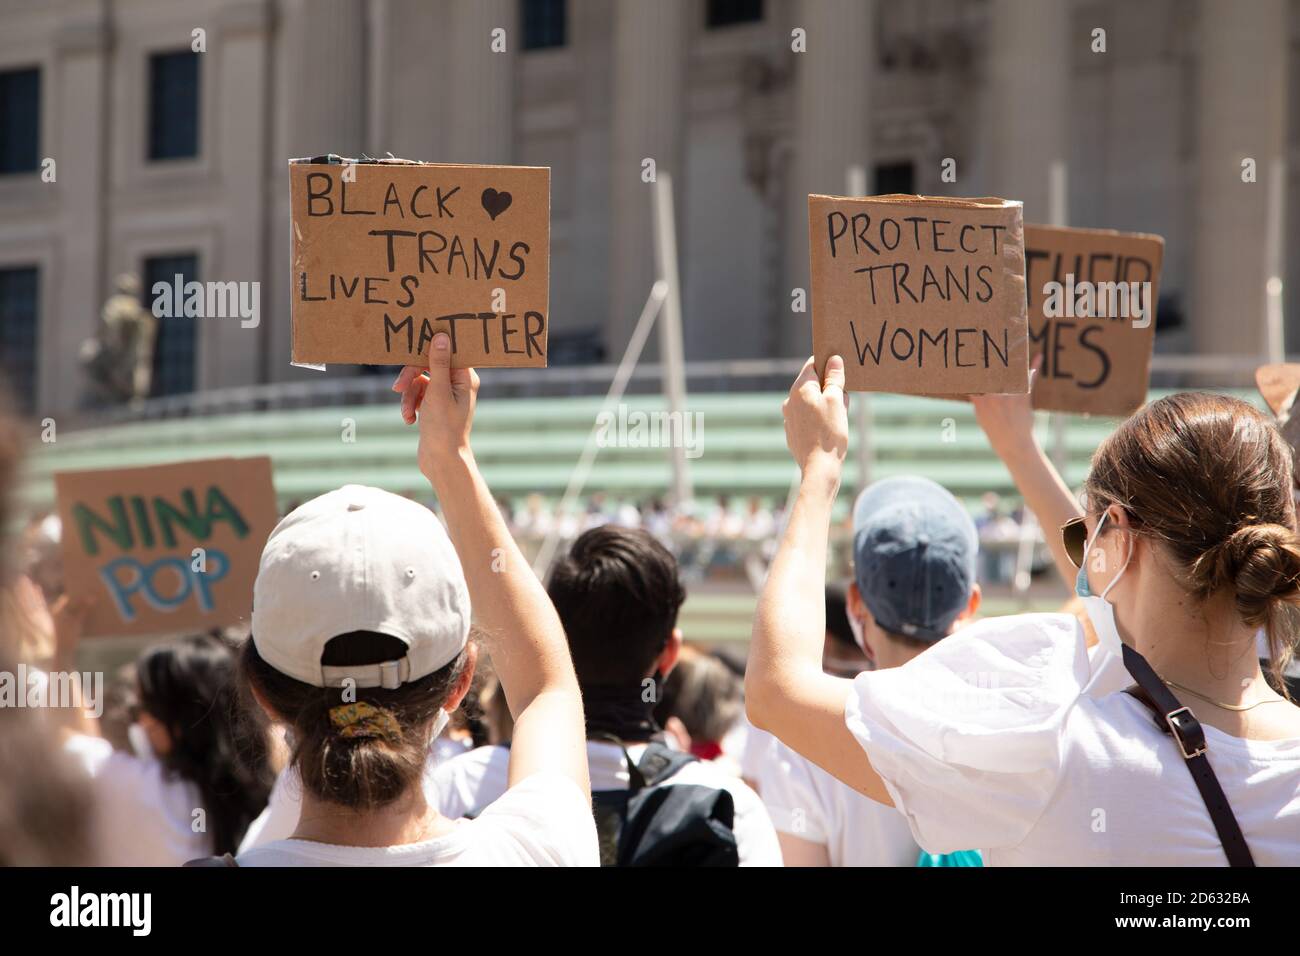 Protesters holding up Black Trans Lives Matter and Protect Trans Women Signs during Protest outside Brooklyn Museum, Brooklyn, New York, USA Stock Photo